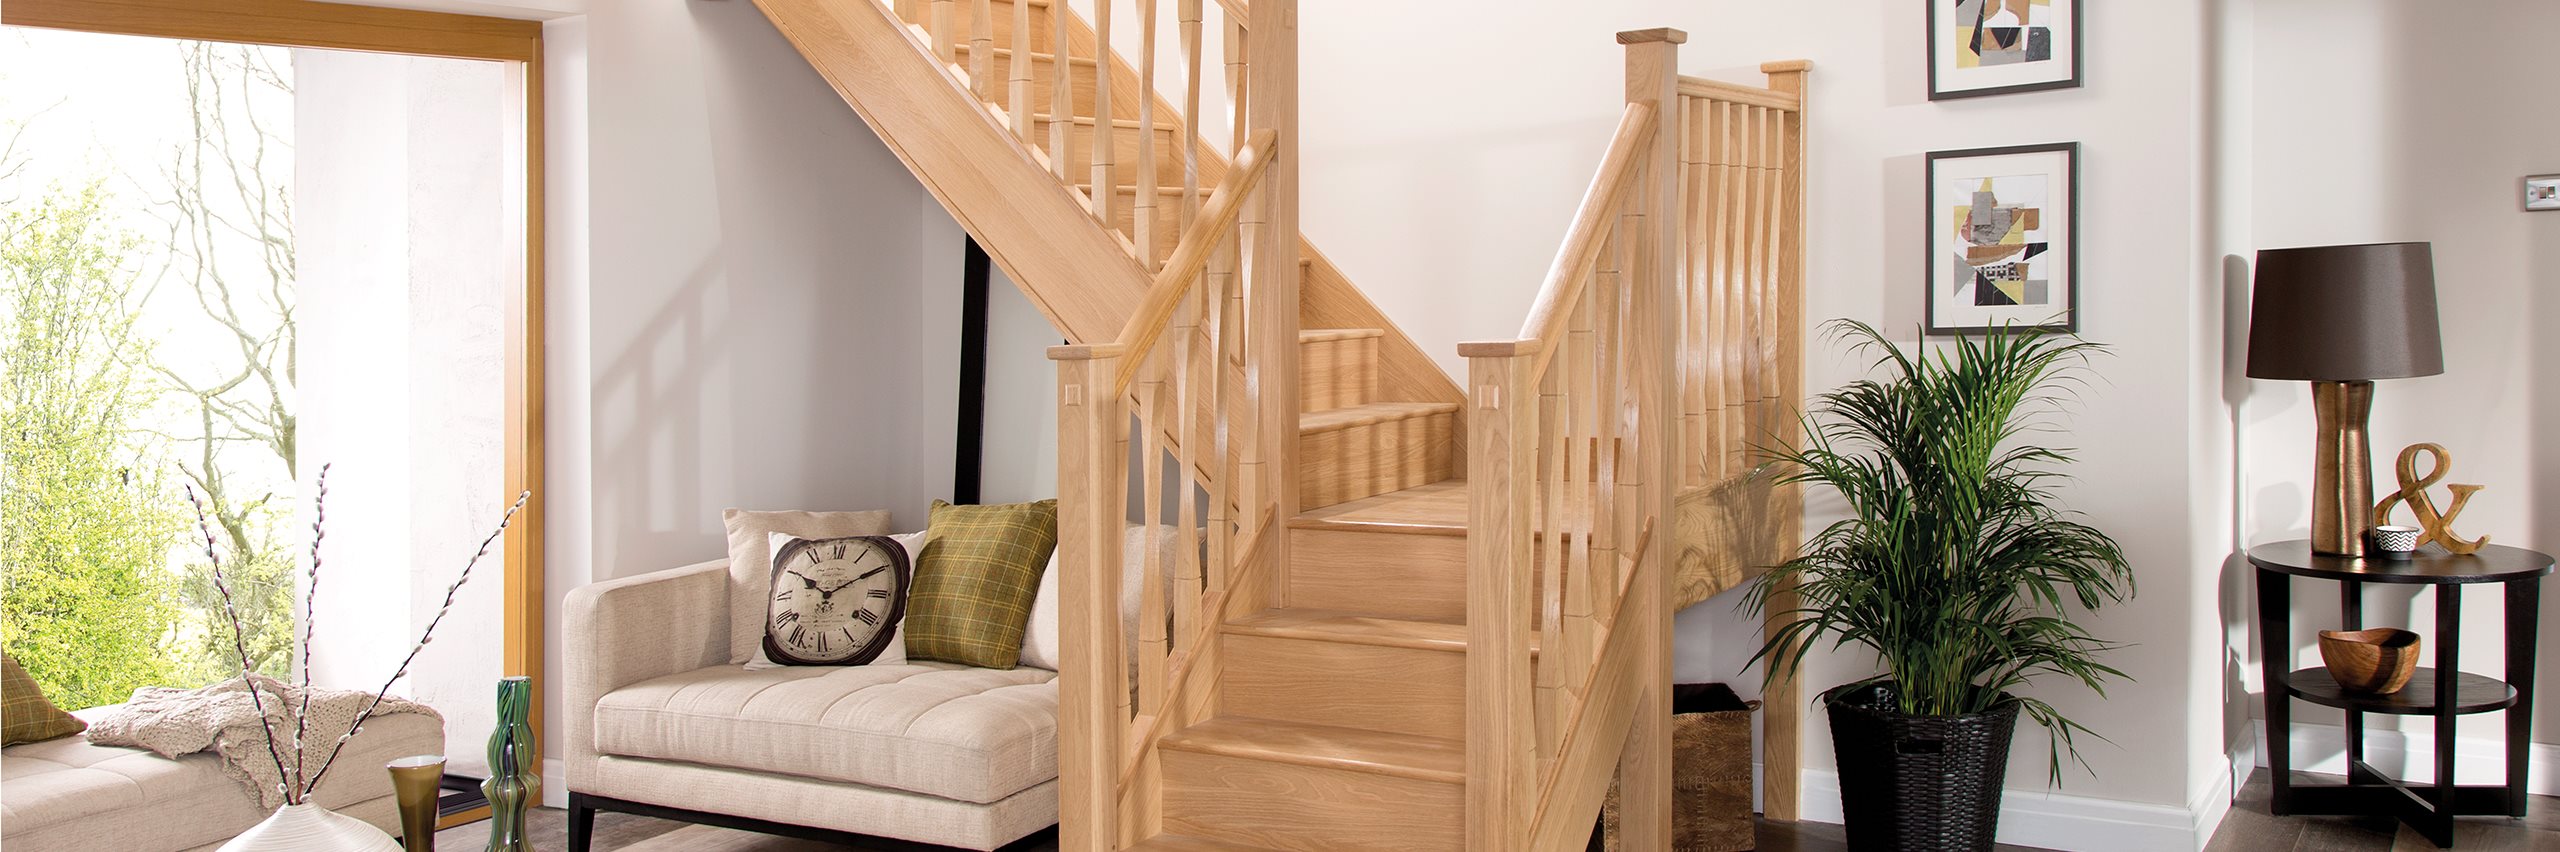 REQUEST A STAIR QUOTE